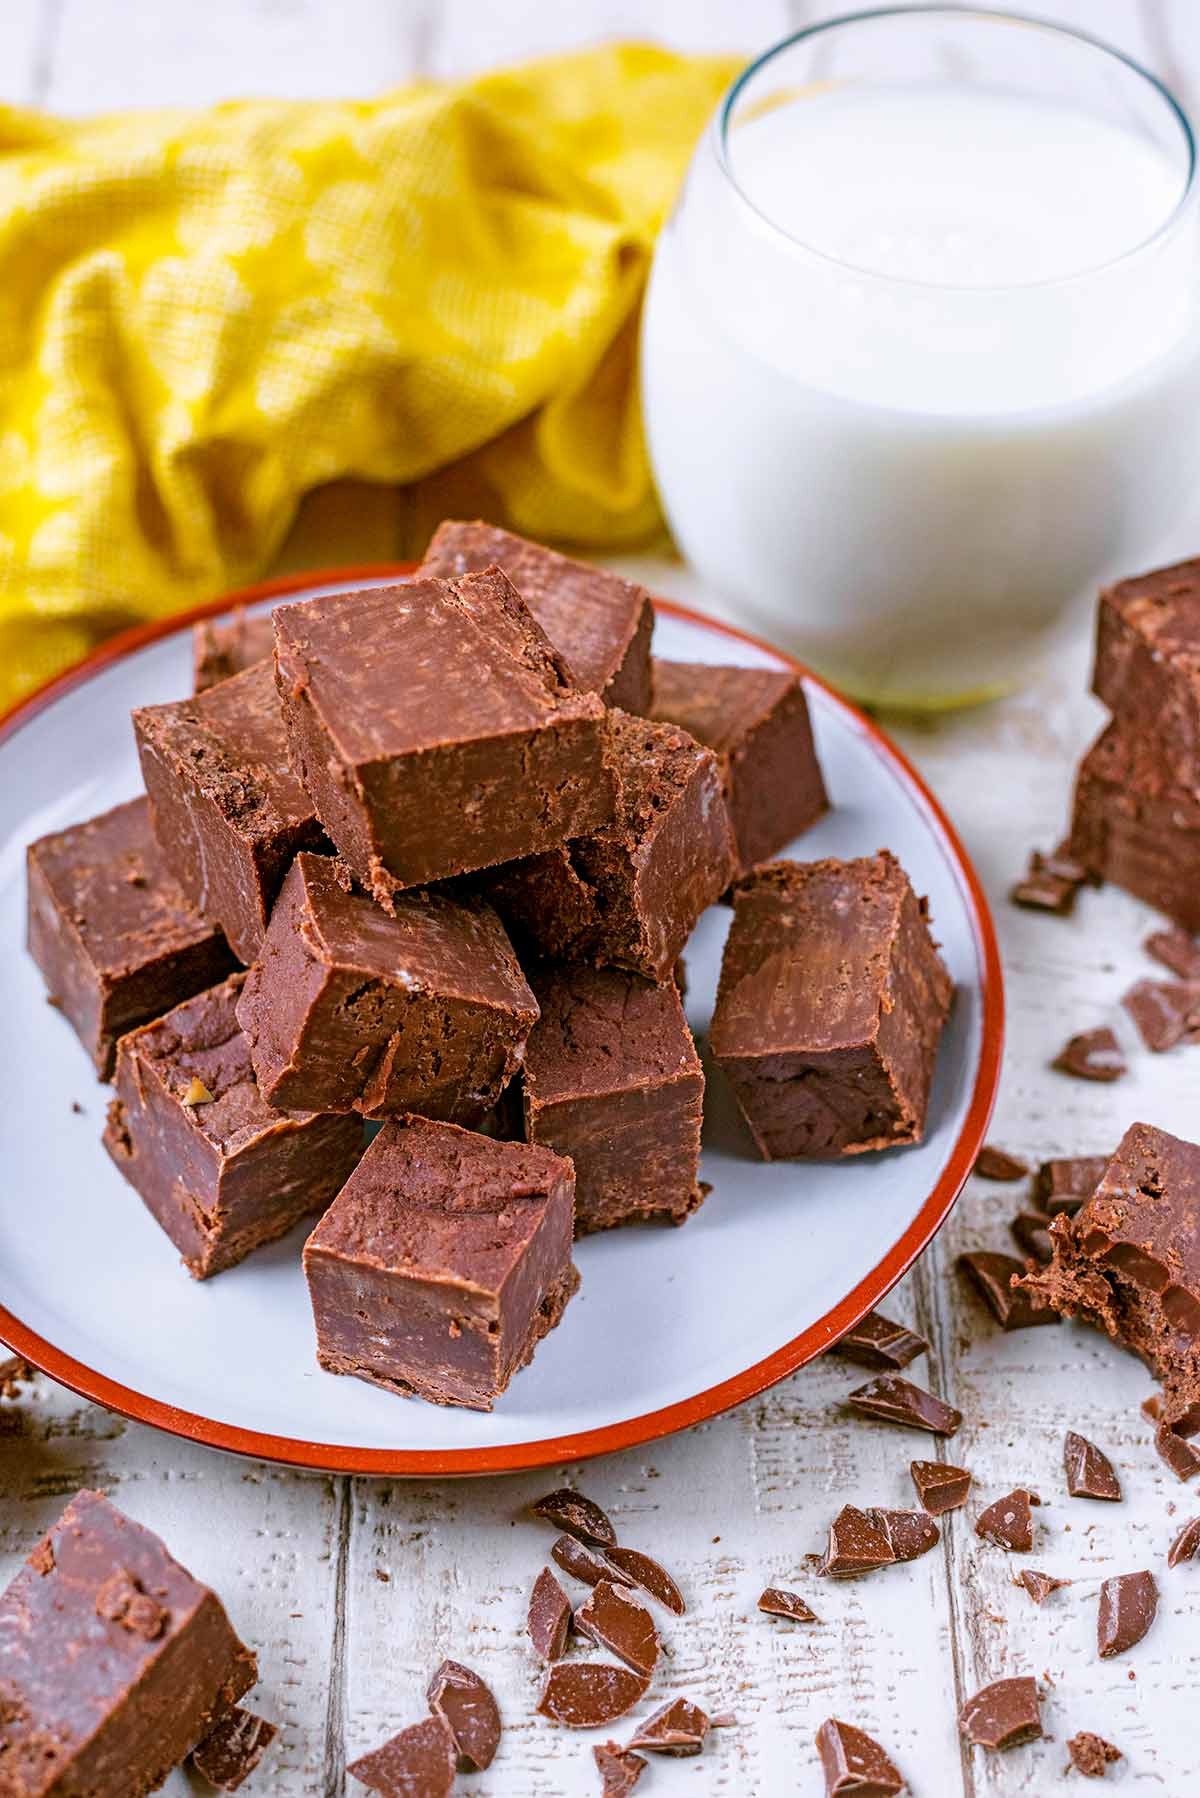 A pile of fudge cubes on a plate in front of a glass of milk.